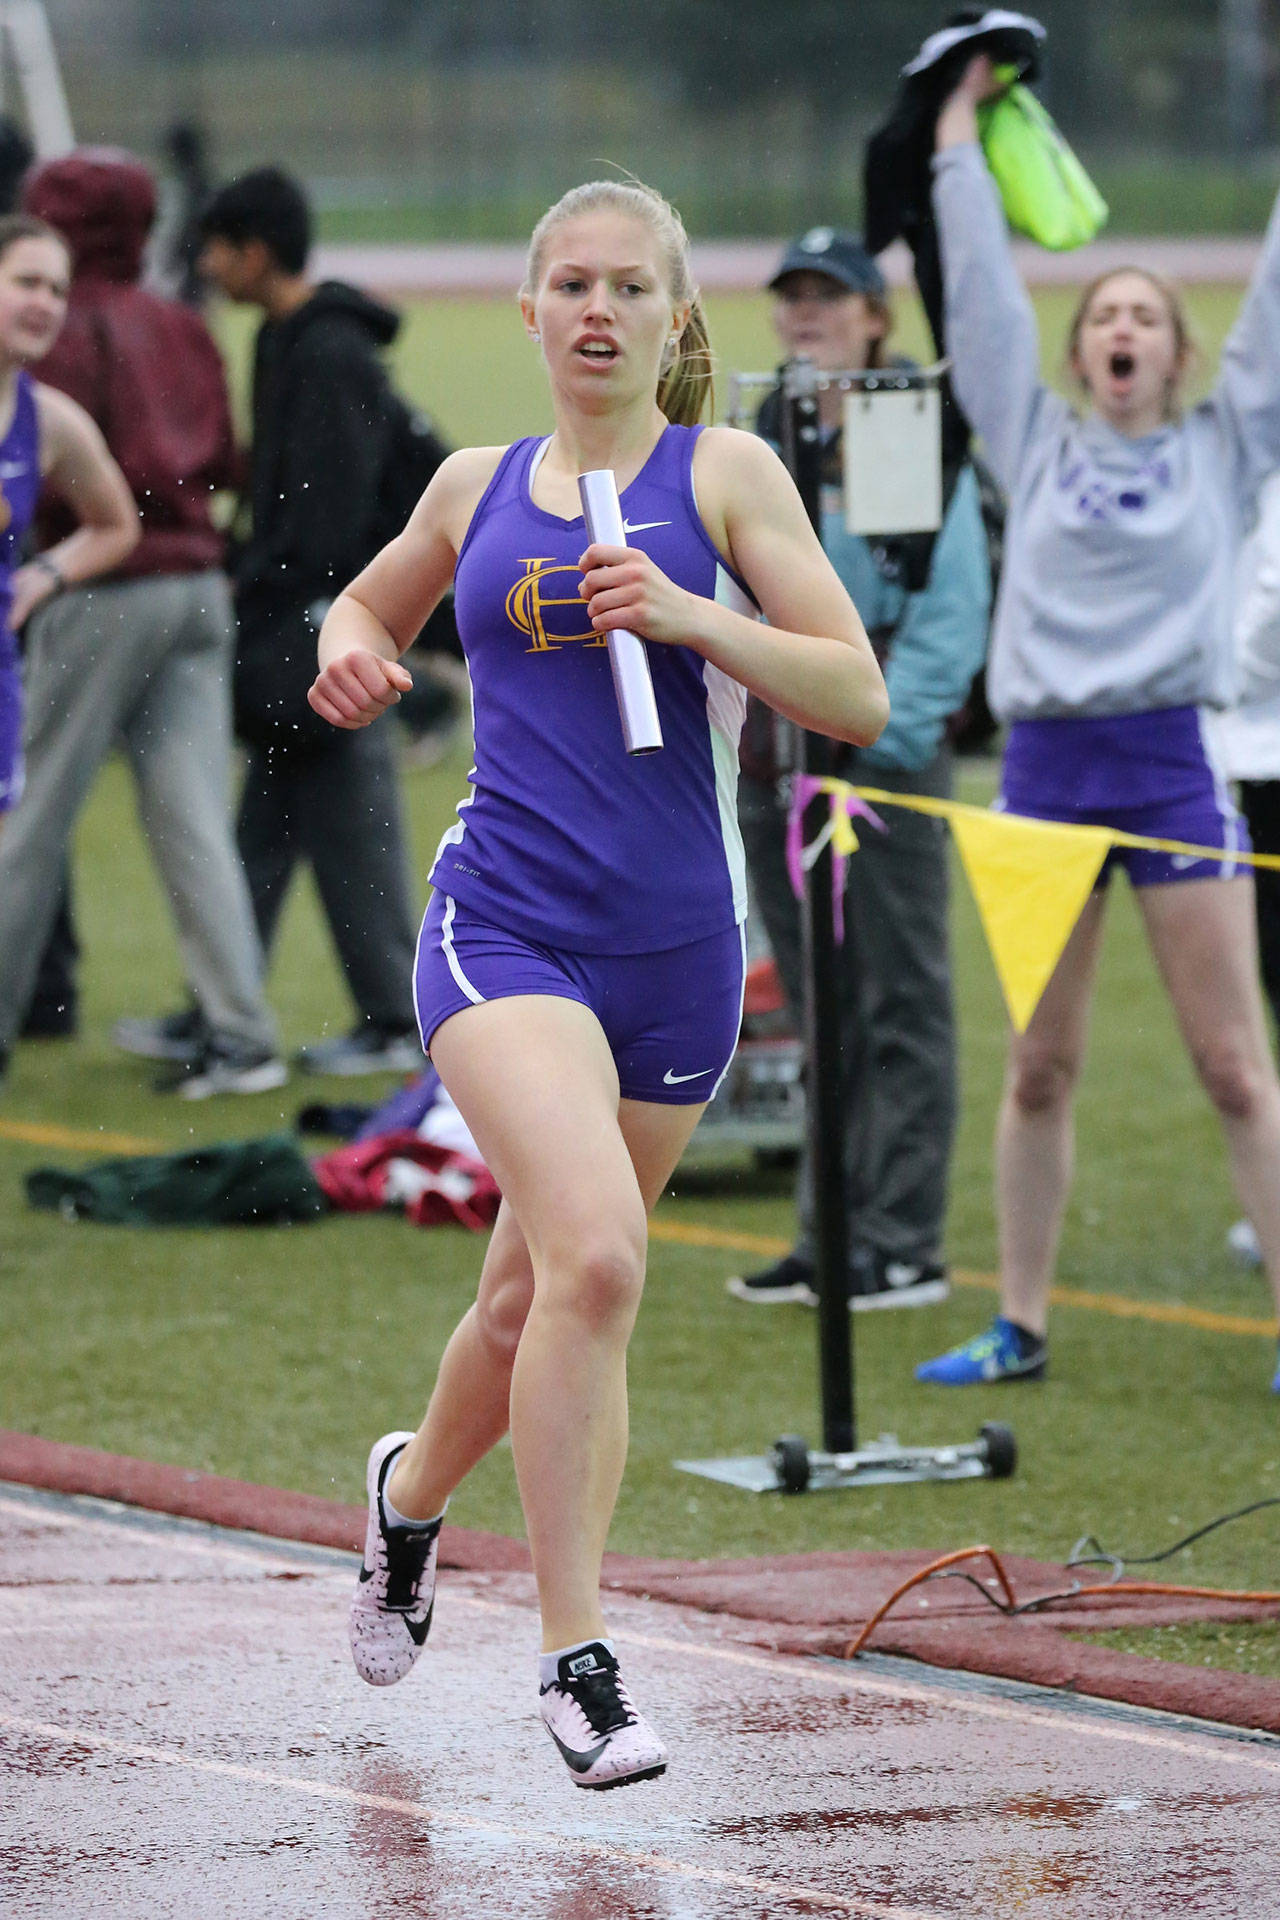 Natalie French helps Oak Harbor win the 4x400 relay as Brenna Rothman (background), who ran an earlier leg, cheers her on.(Photo by John Fisken)